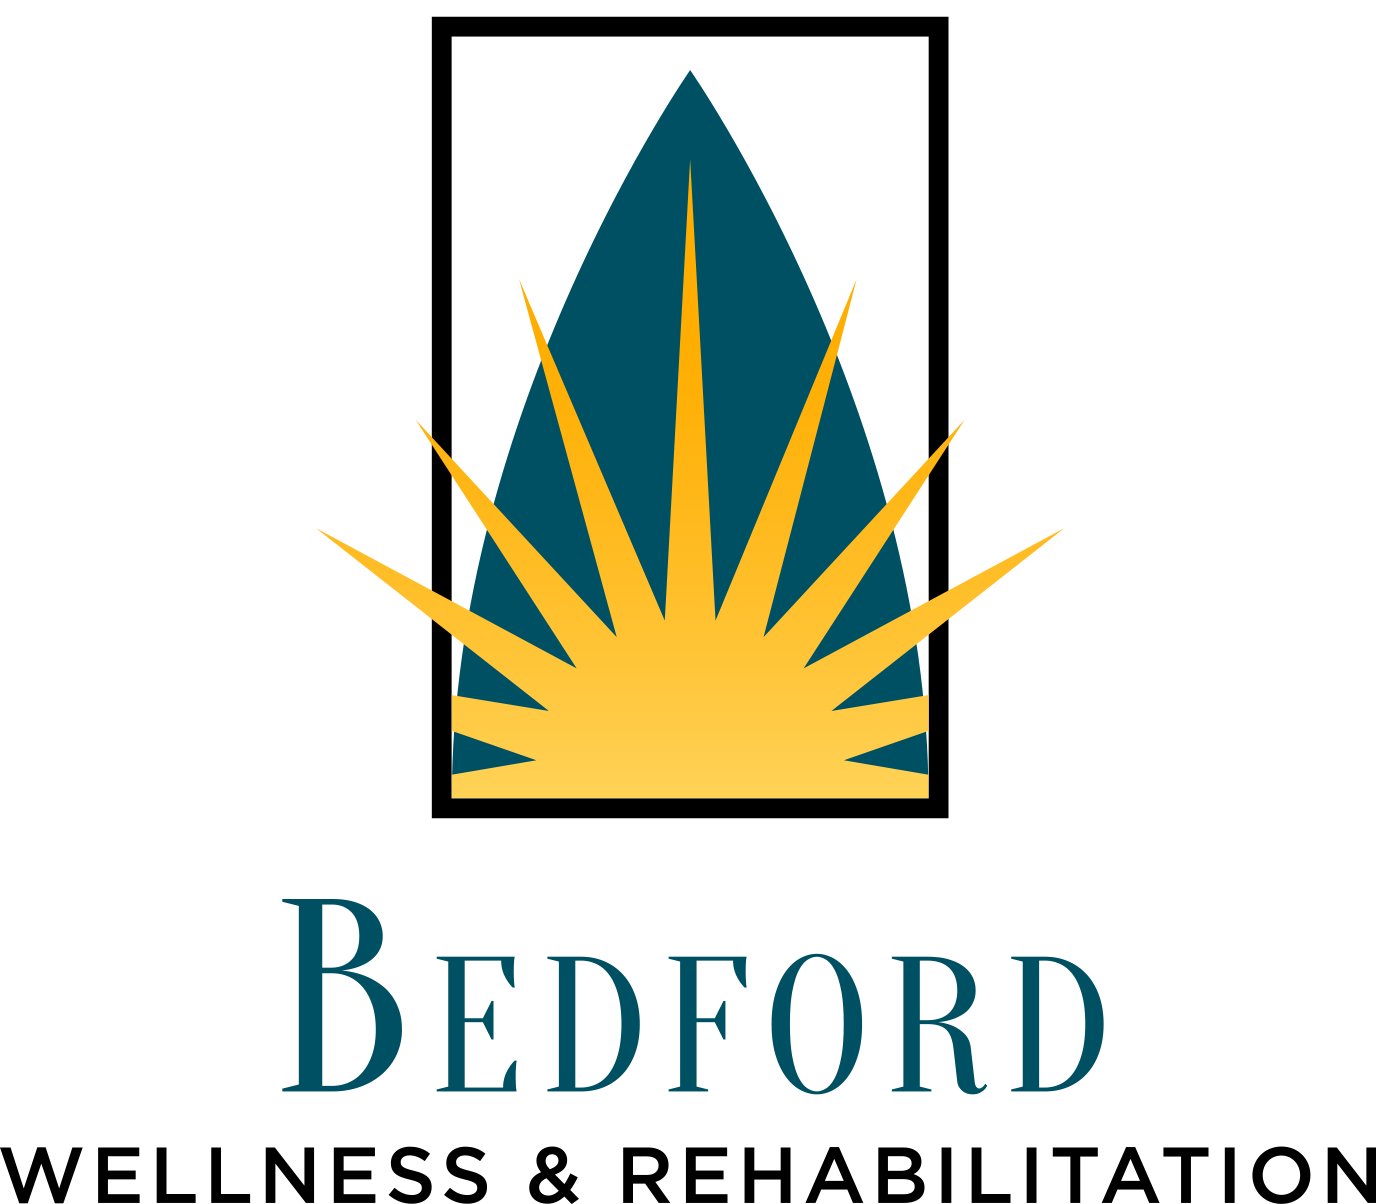 Bedford Wellness and Rehab